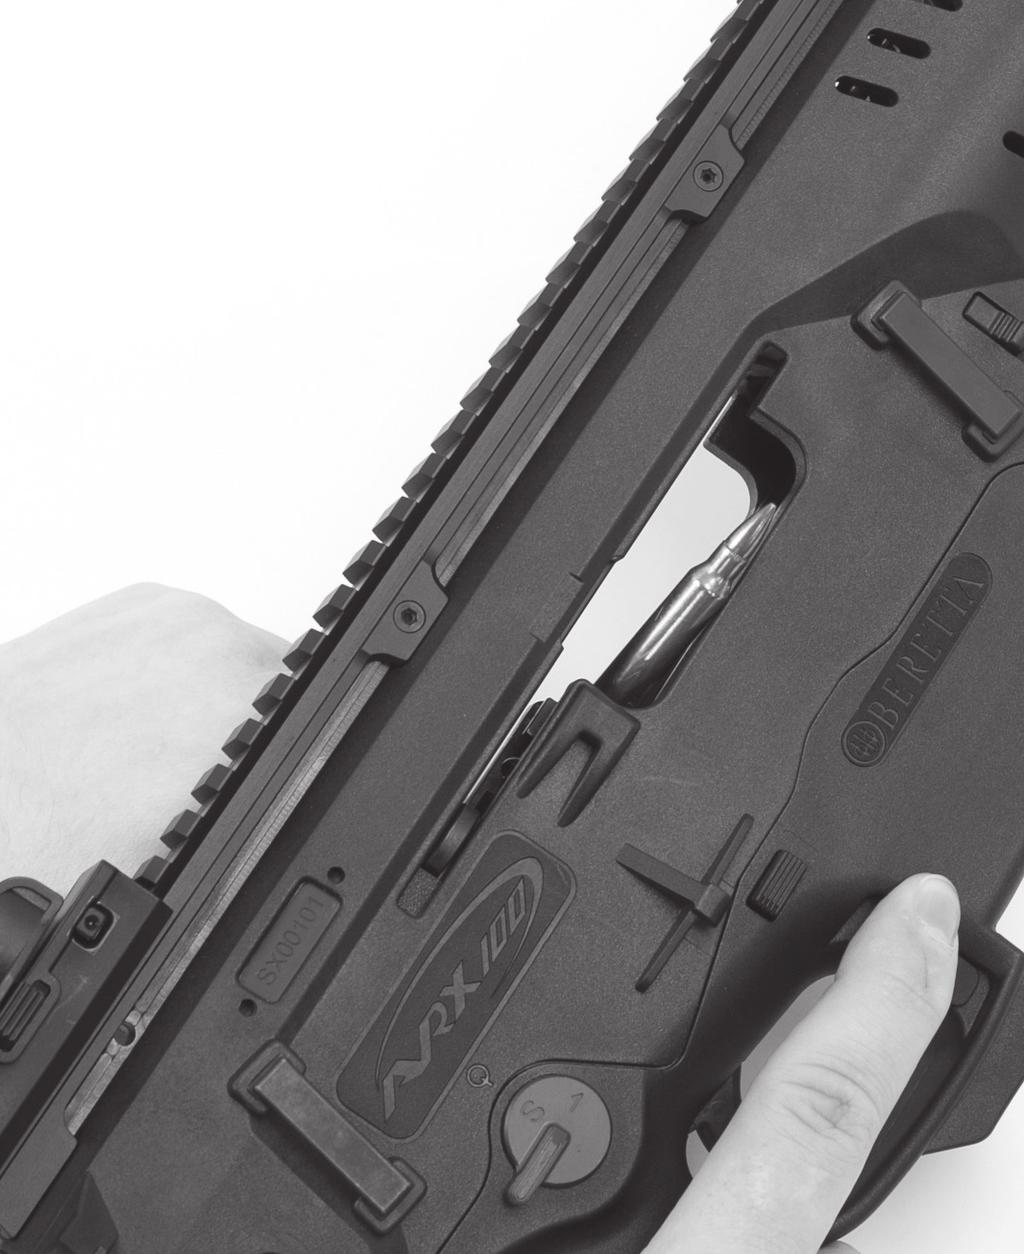 Unloading To unload your Beretta ARX100 press the magazine release on the